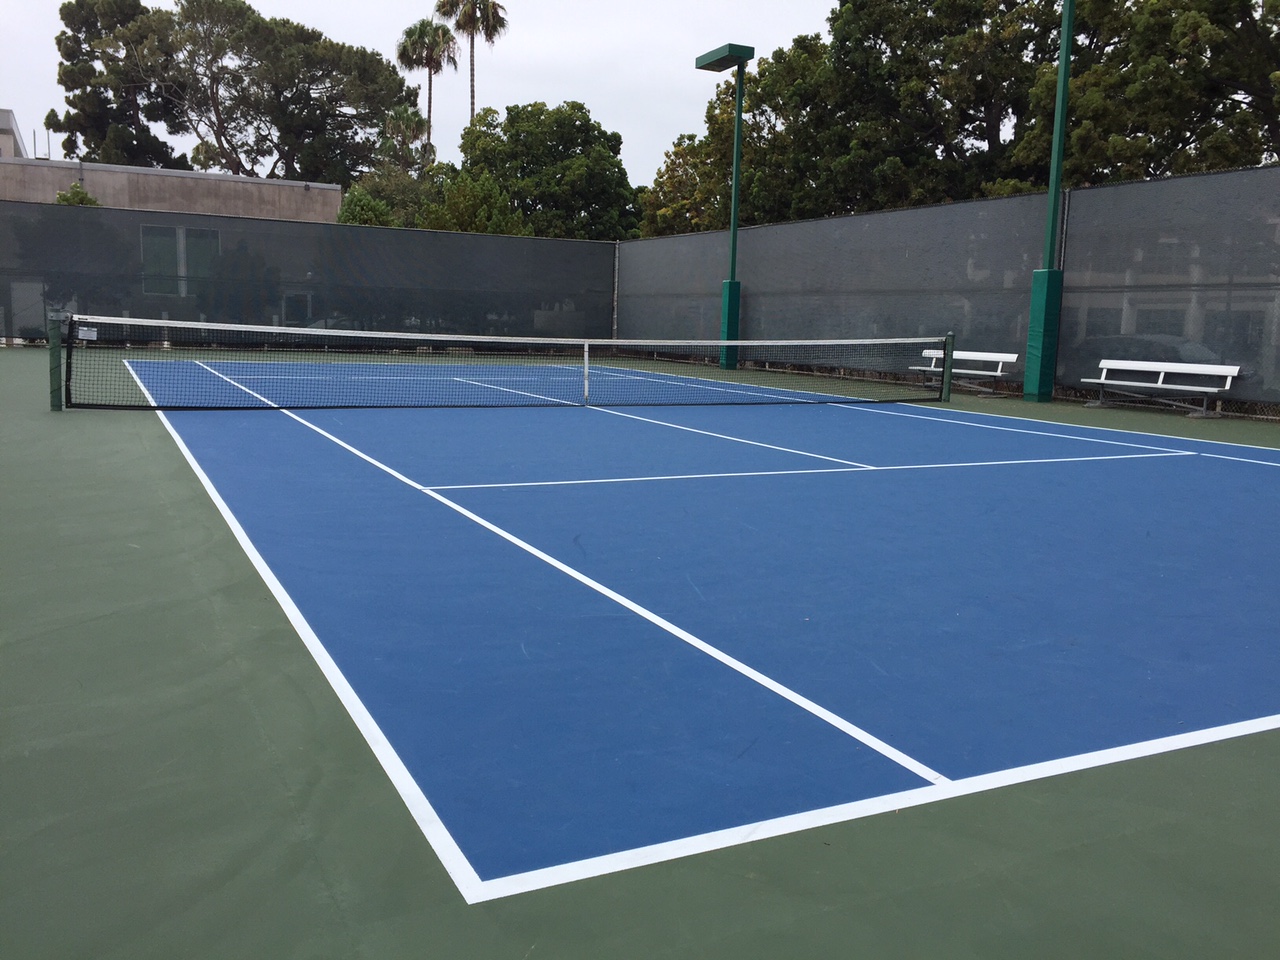 Resurfaced Library Tennis Court in 